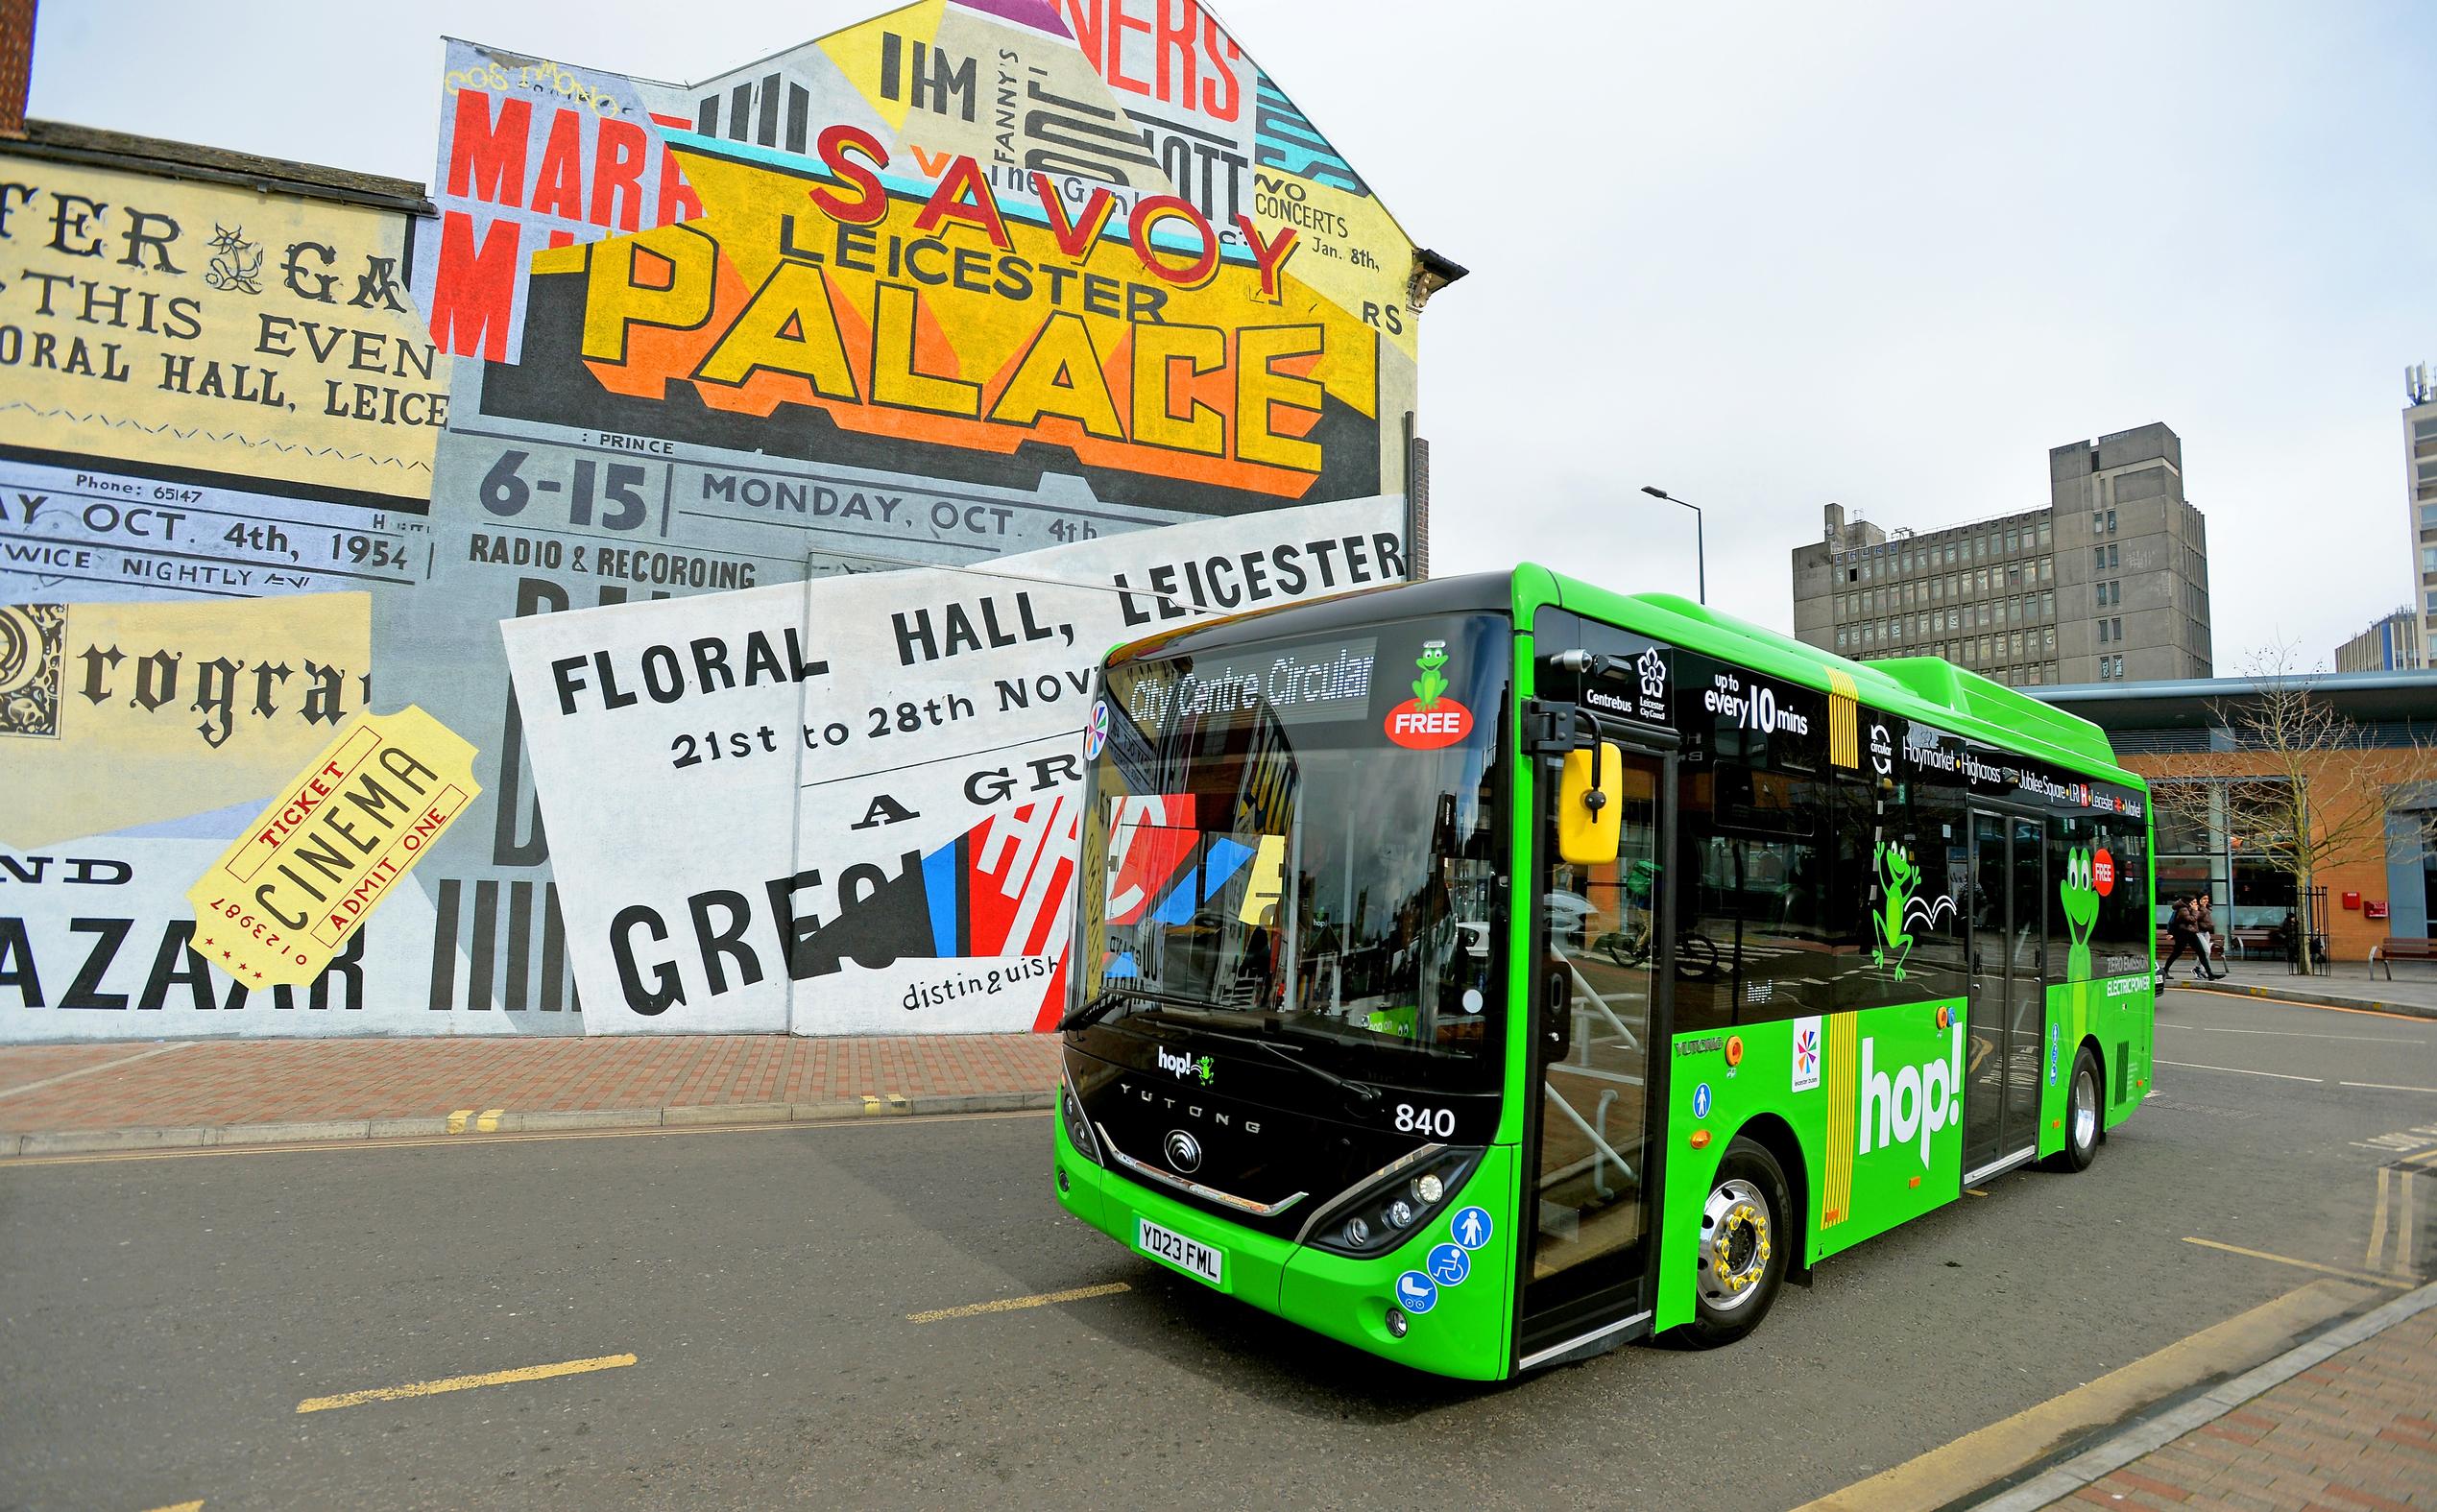 The fleet of three electric Hop! buses run every 10 minutes in Leicester city centre